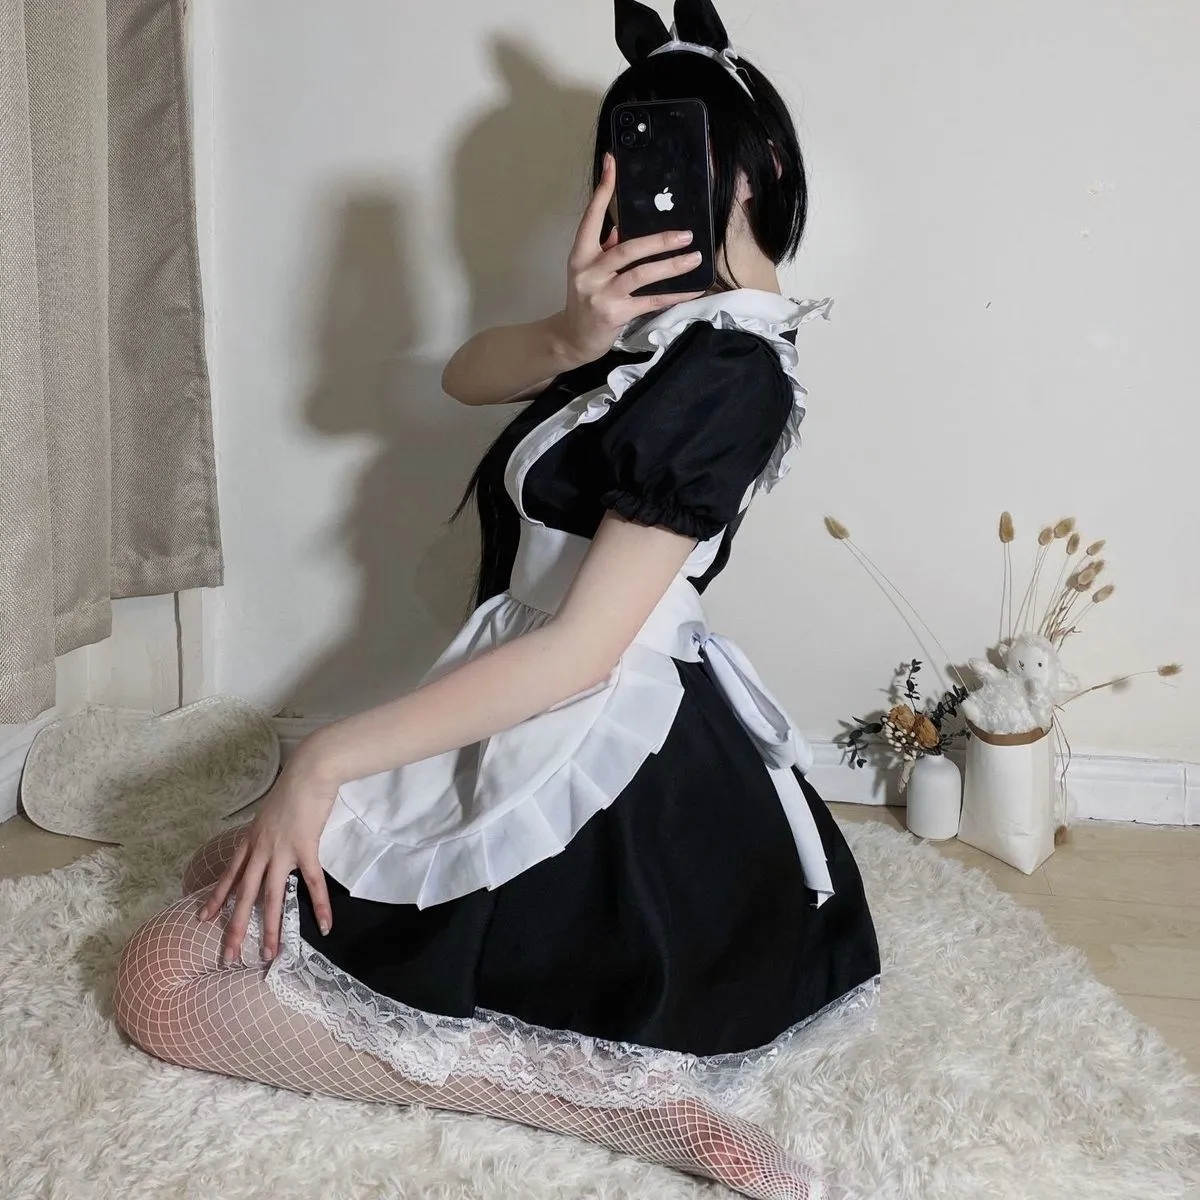 Sexy Lingerie Cosplay Japanese Maid Outfit Babydoll Dress Uniform Suit ...